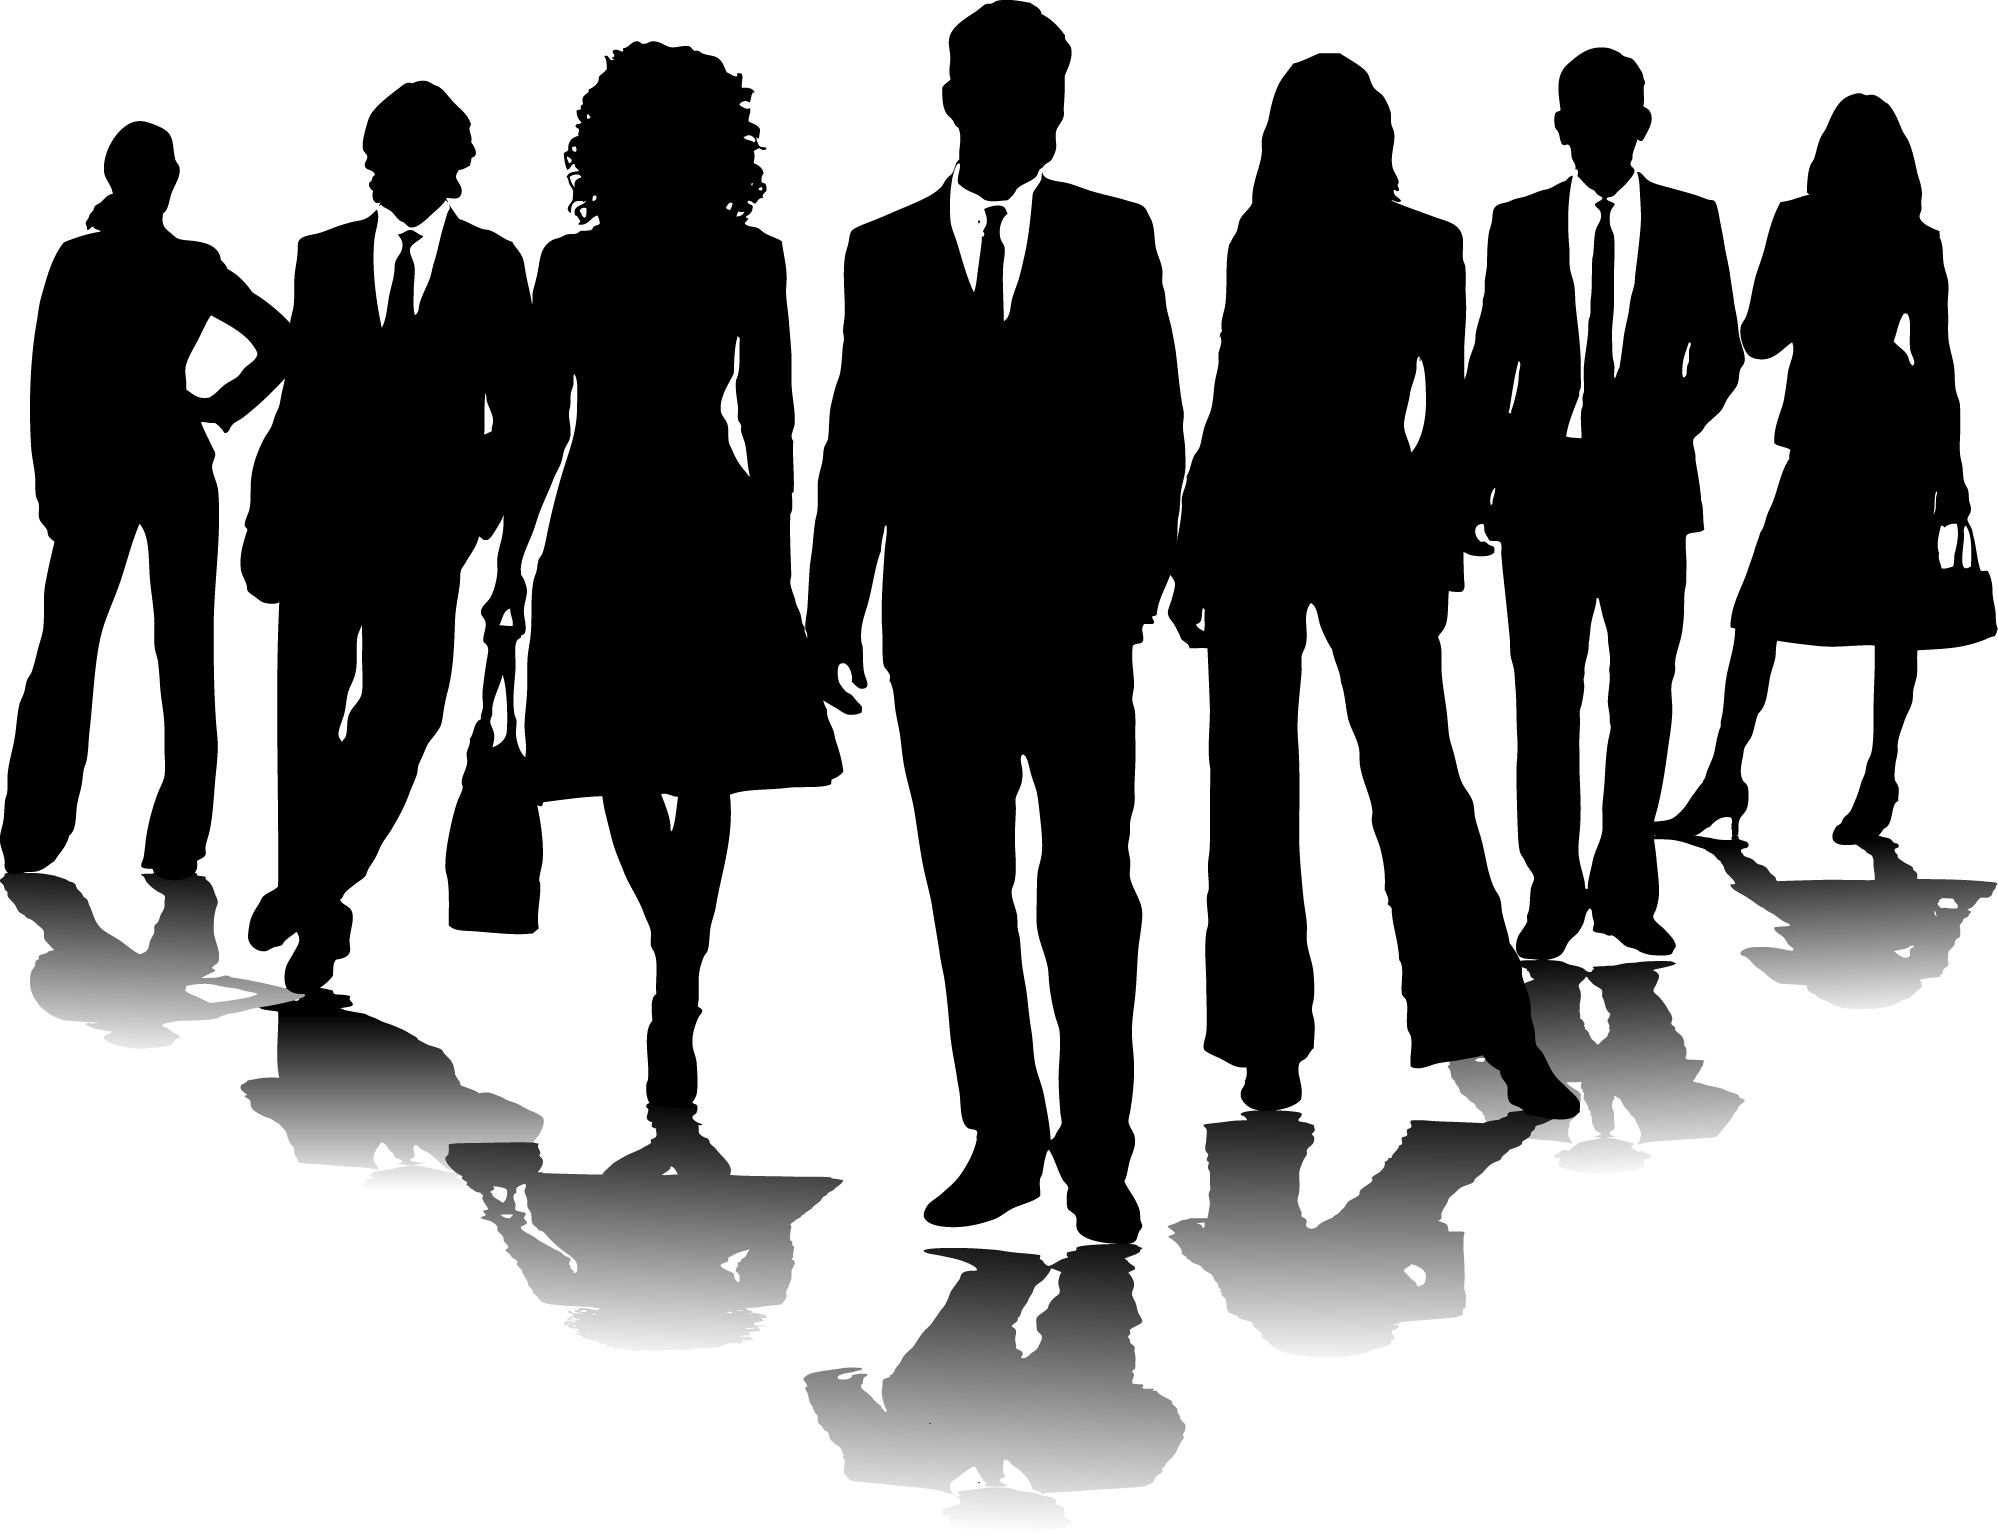 Business people clipart free clipart images 2.